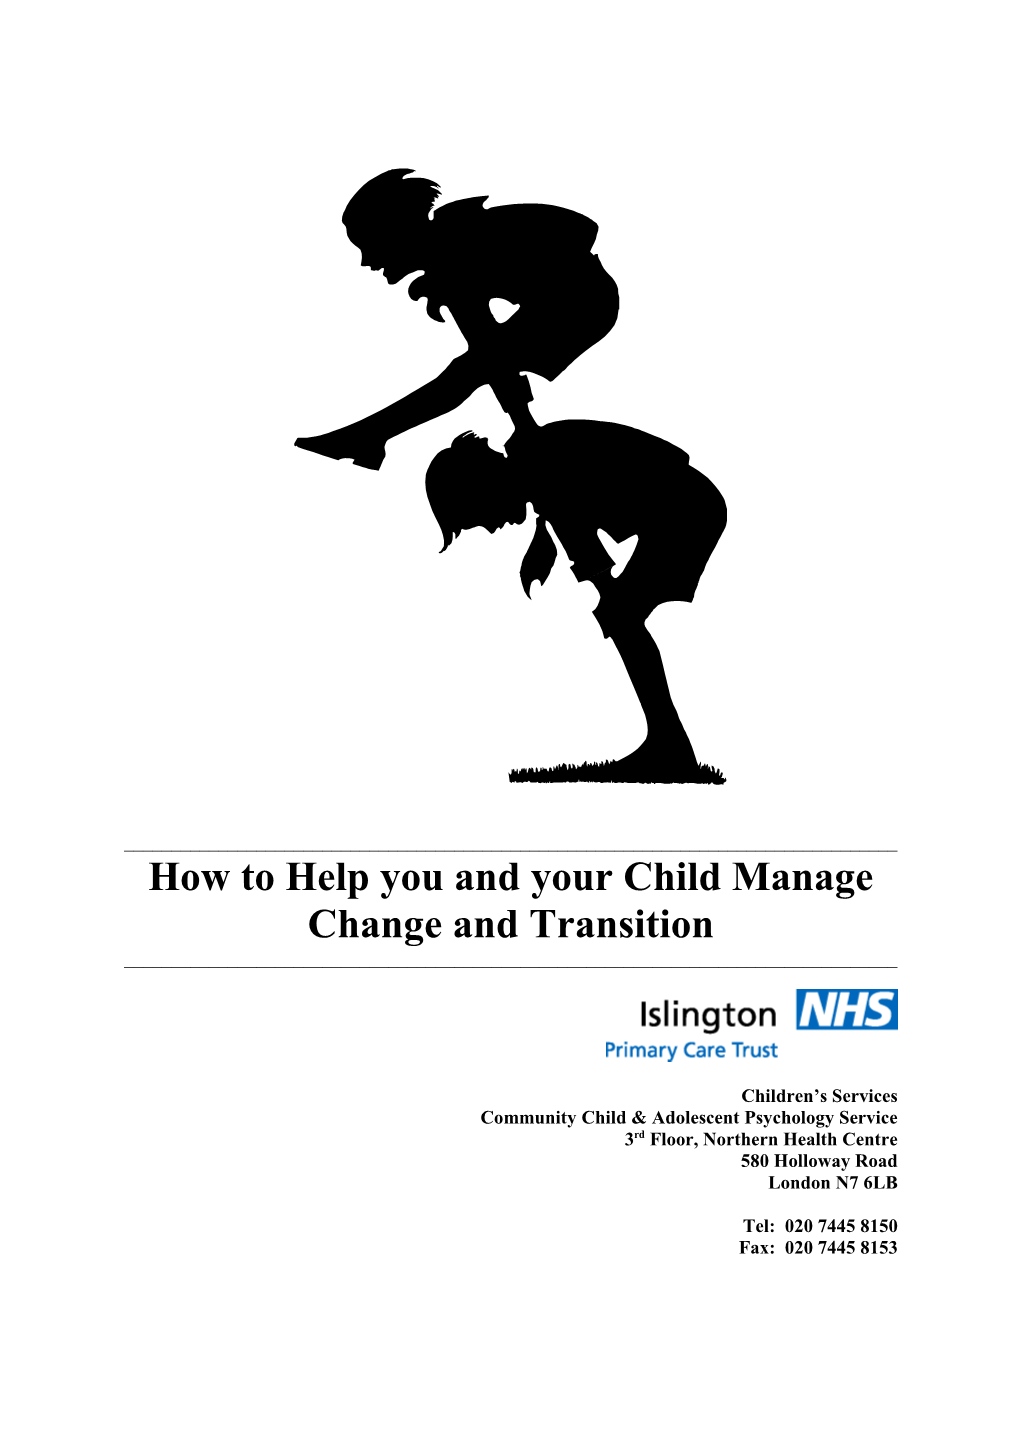 How to Help You and Your Child Manage Change and Transition